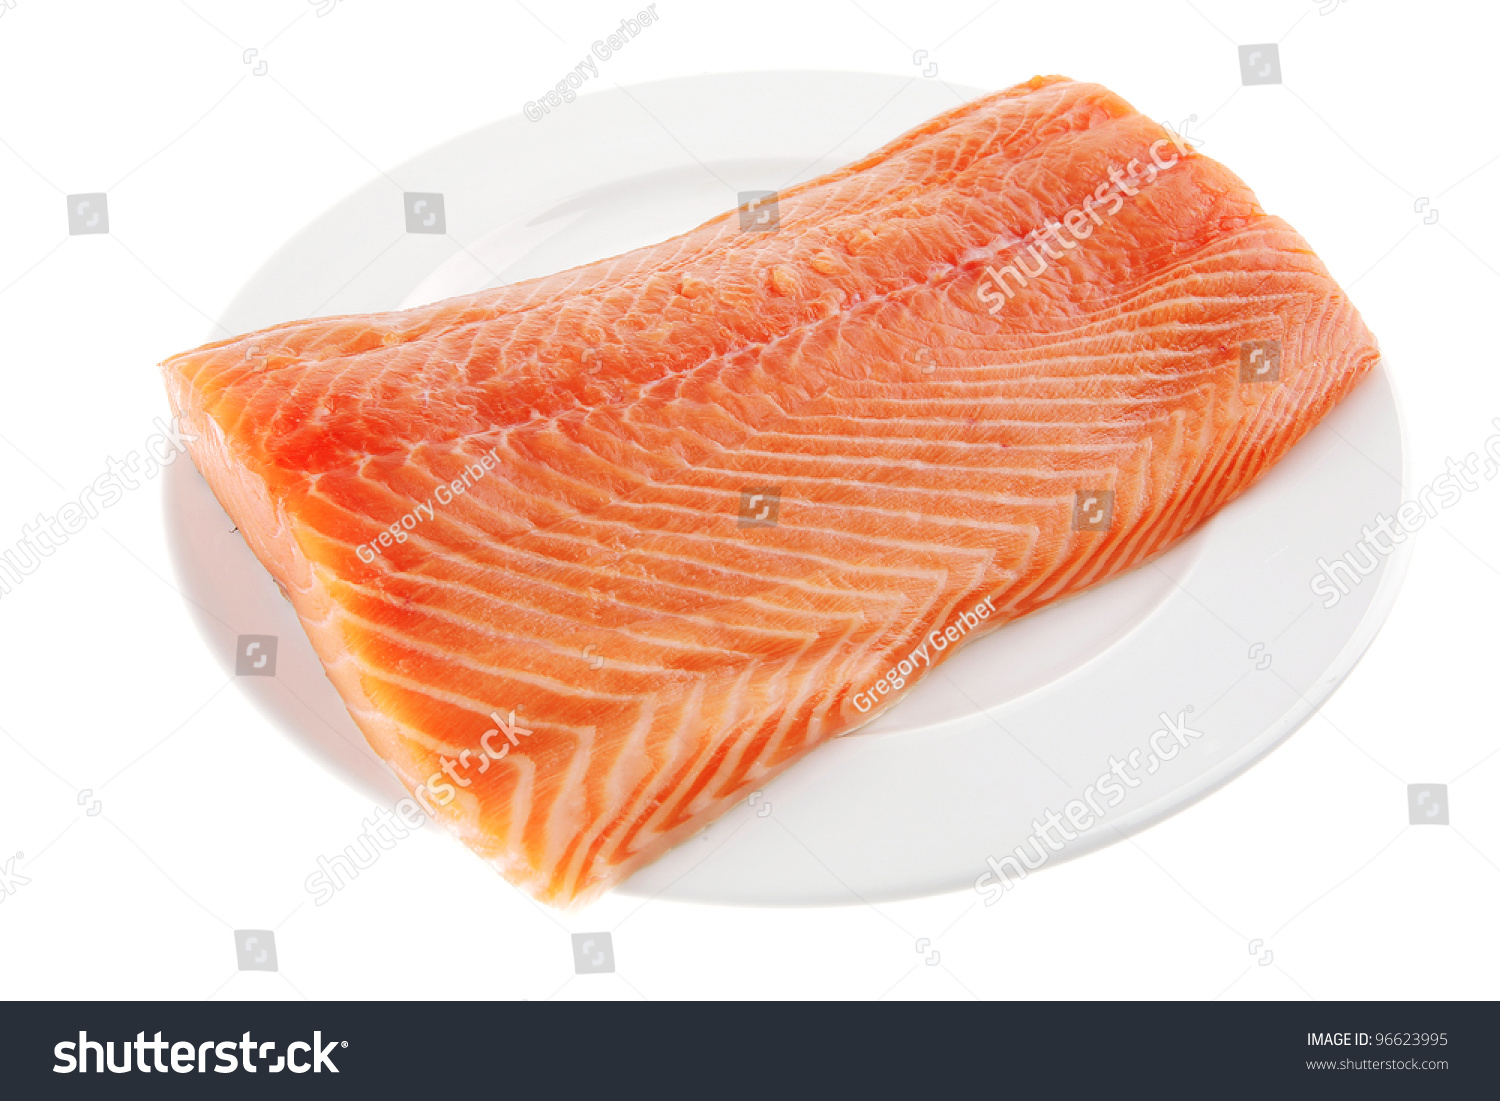 Fresh Raw Red Fish Fillet On White Plate Stock Photo 96623995 ...